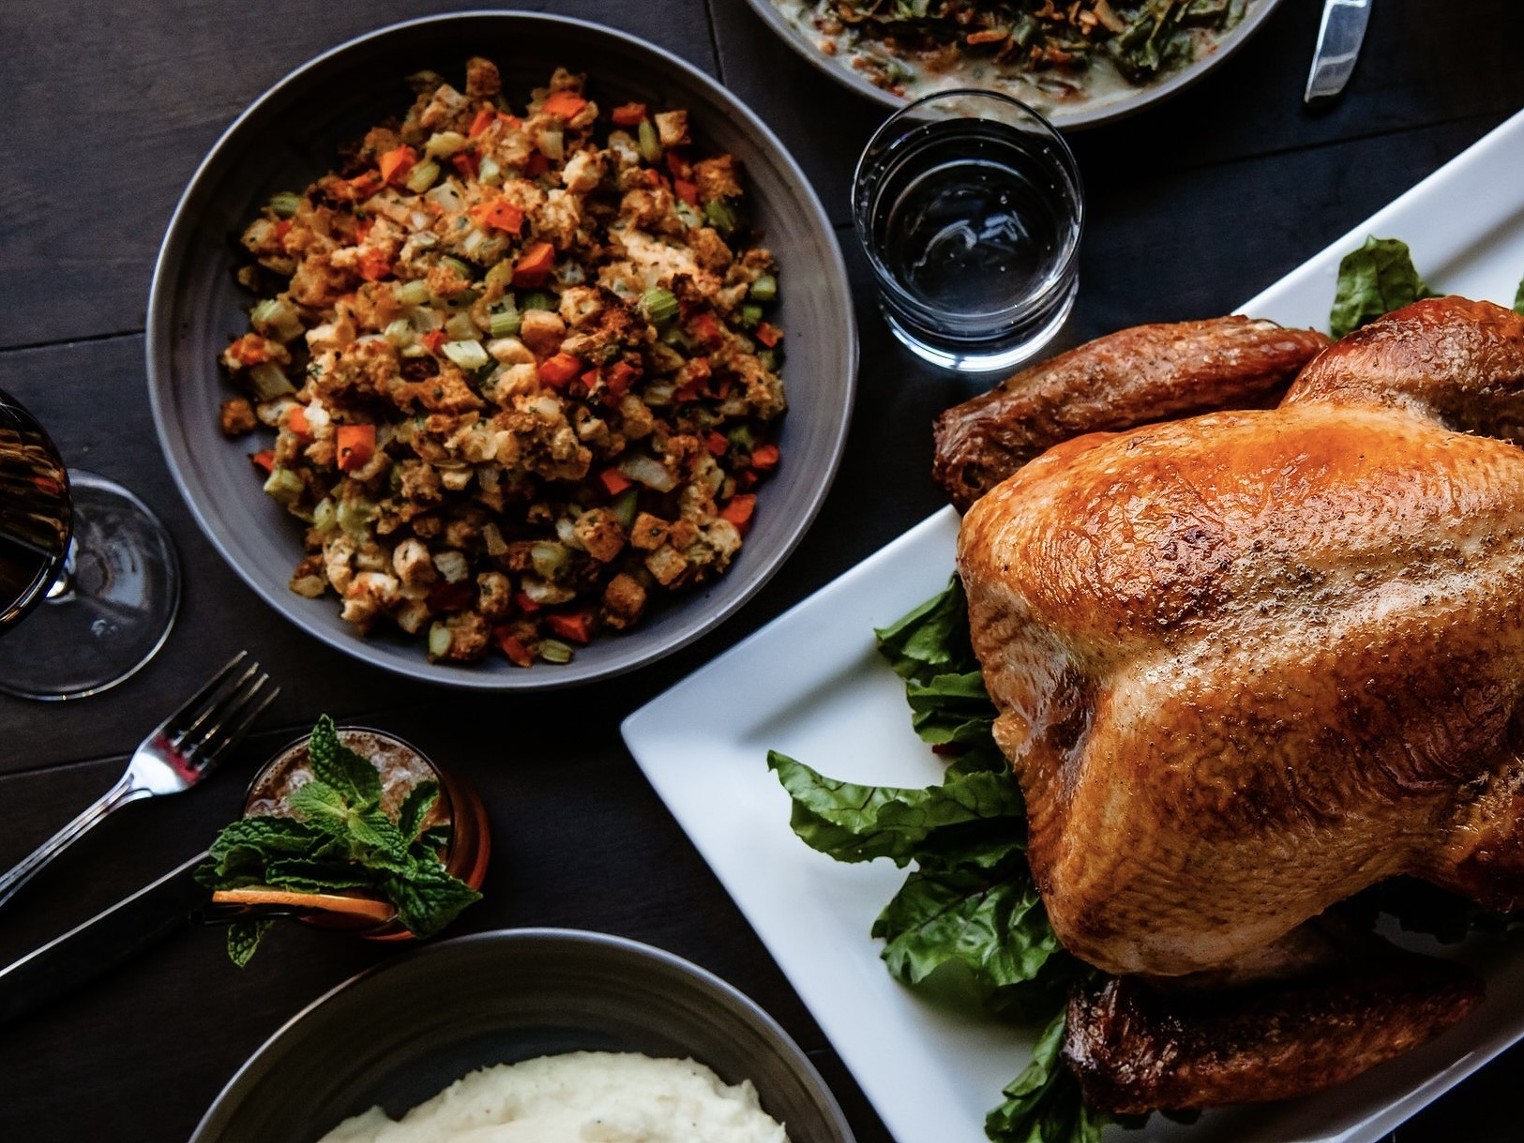 Whole Foods Market South Region Thanksgiving Menu by Whole Foods